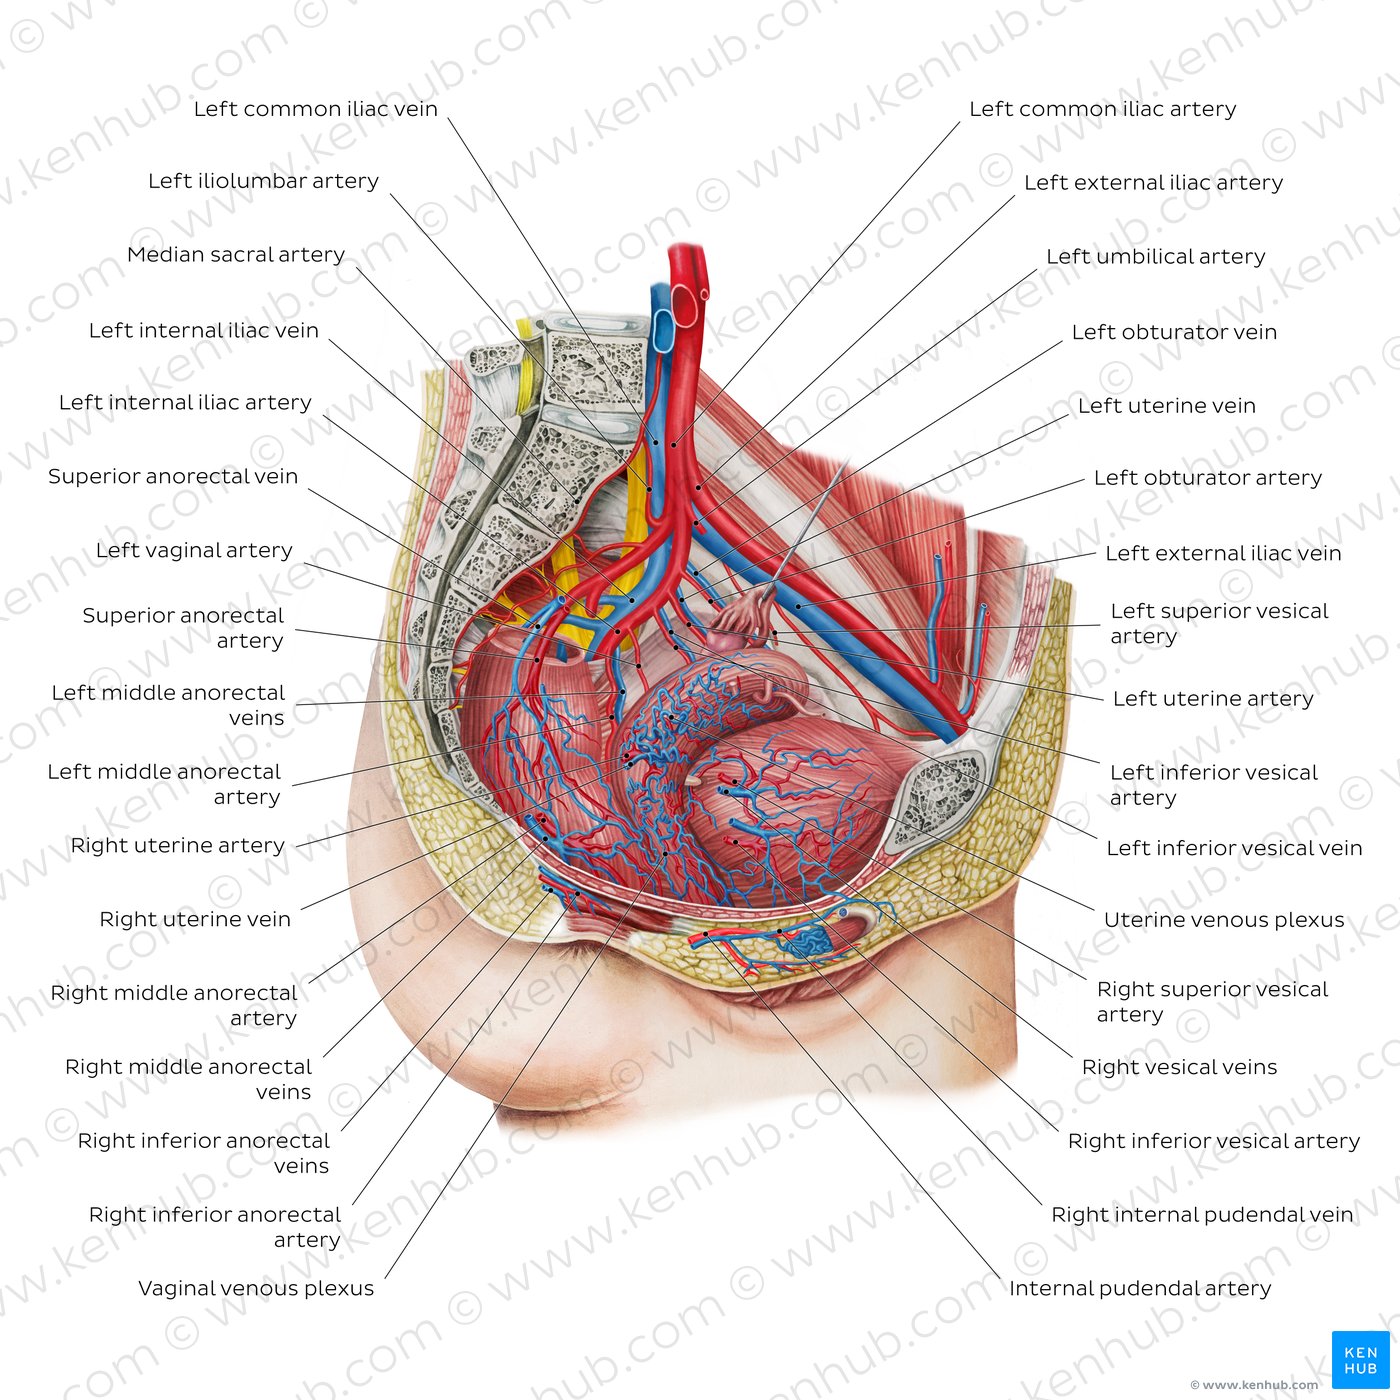 Blood vessels of the female pelvis (overview diagram)